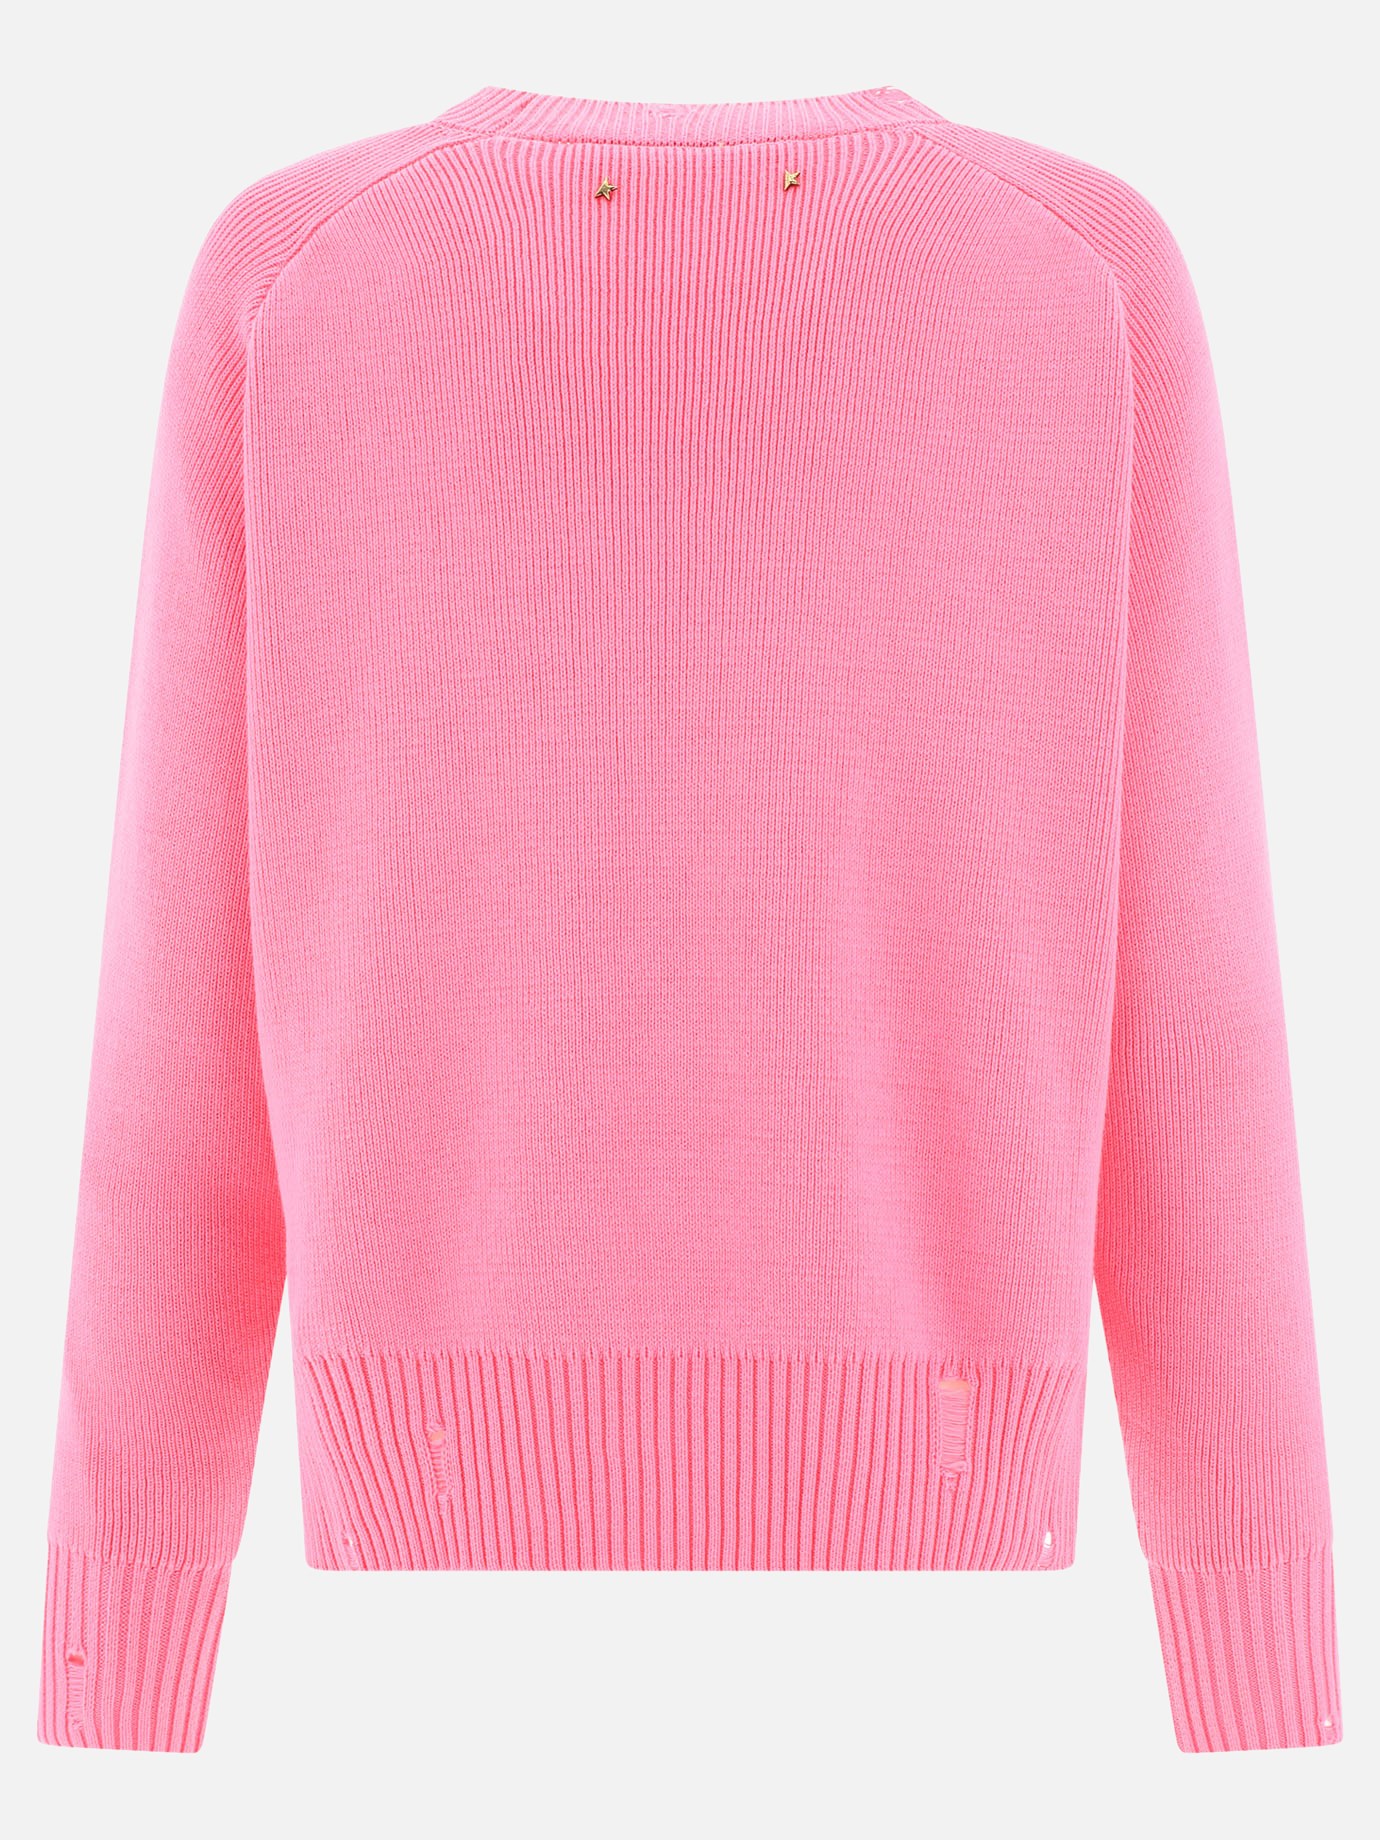  Delilah  sweater by Golden Goose